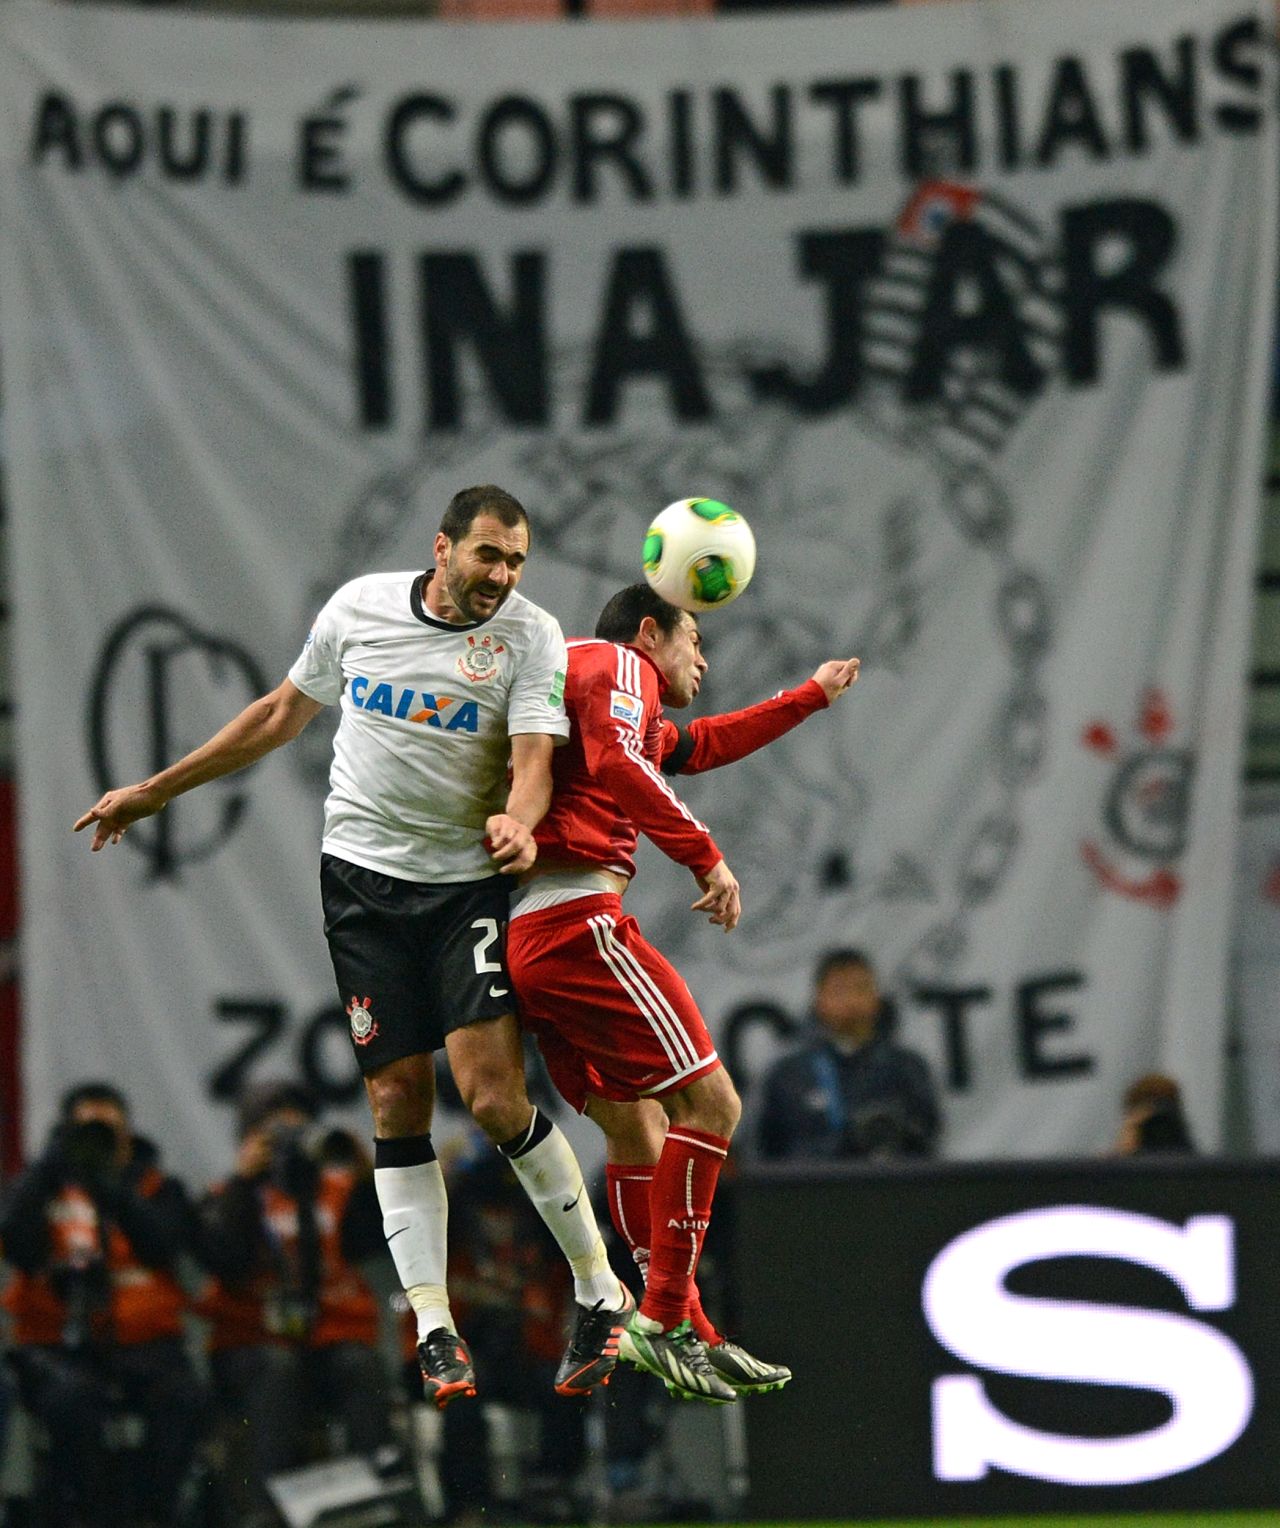 Corinthians were backed by thousands of supporters, who had come armed with huge banners and flags to the Toyota stadium.